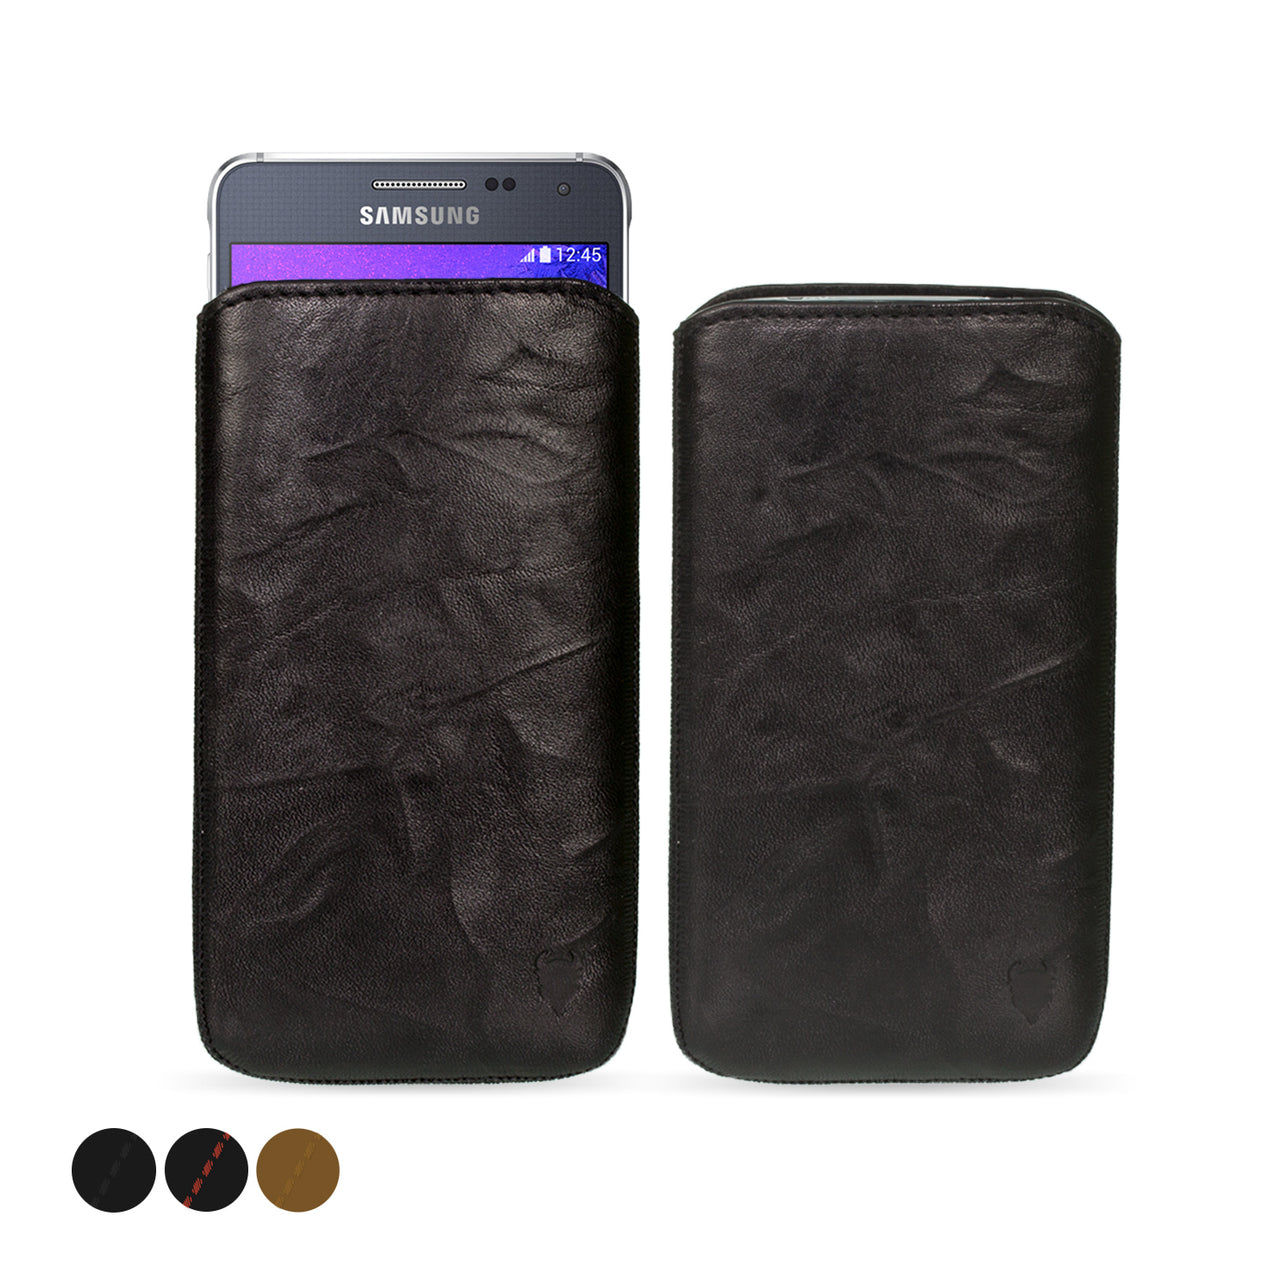 Samsung Galaxy A3 (2014) Genuine Leather Pouch Sleeve Case | Artisanpouch